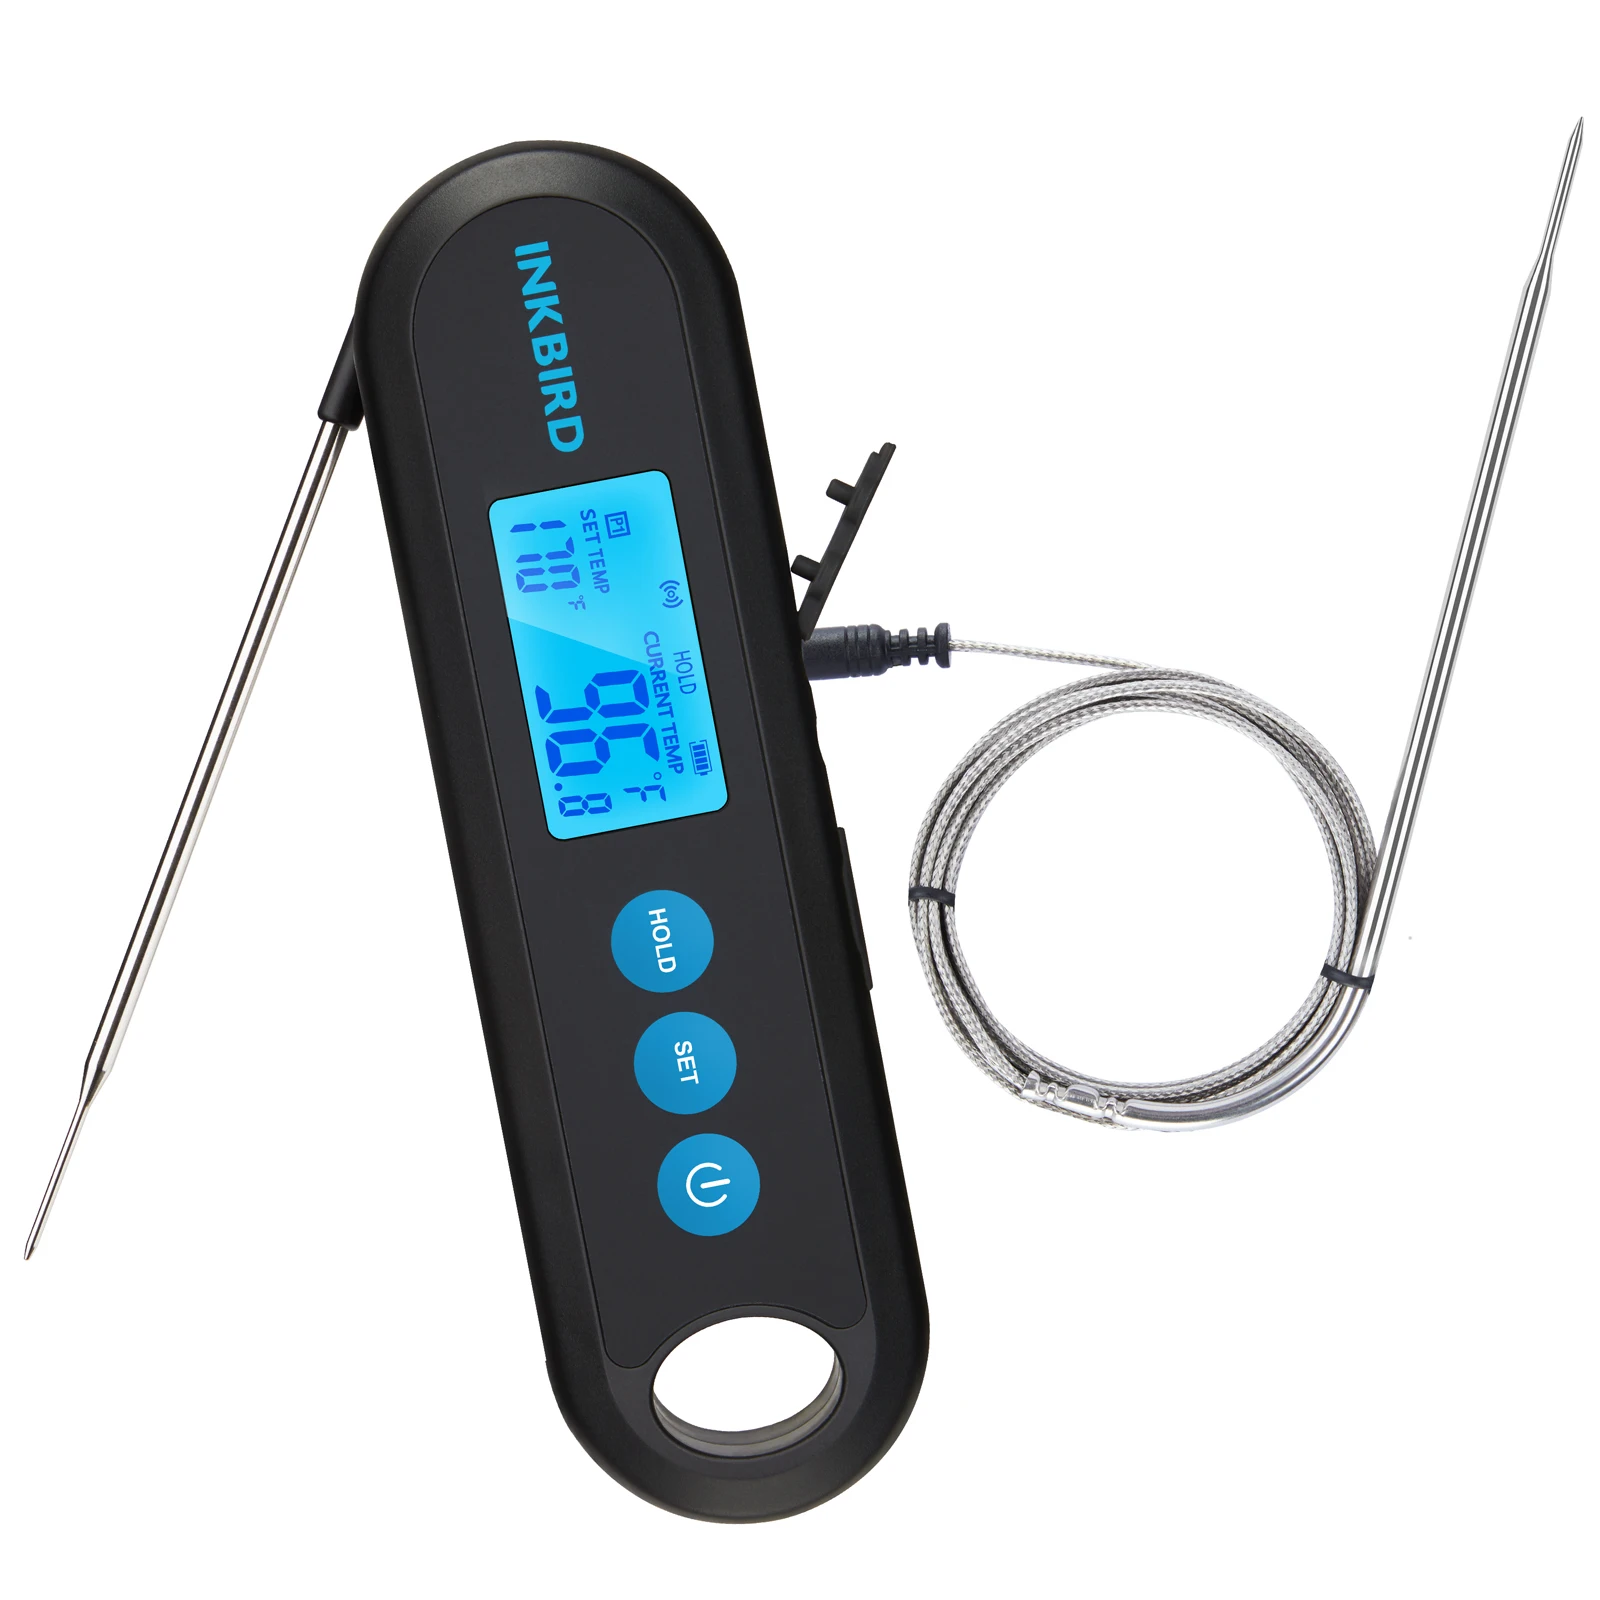 Inkbird Digital Bluetooth Grilling Oven Barbecue Grill Thermometer IBT-2X Thermometer with Two Probes / US Warehouse